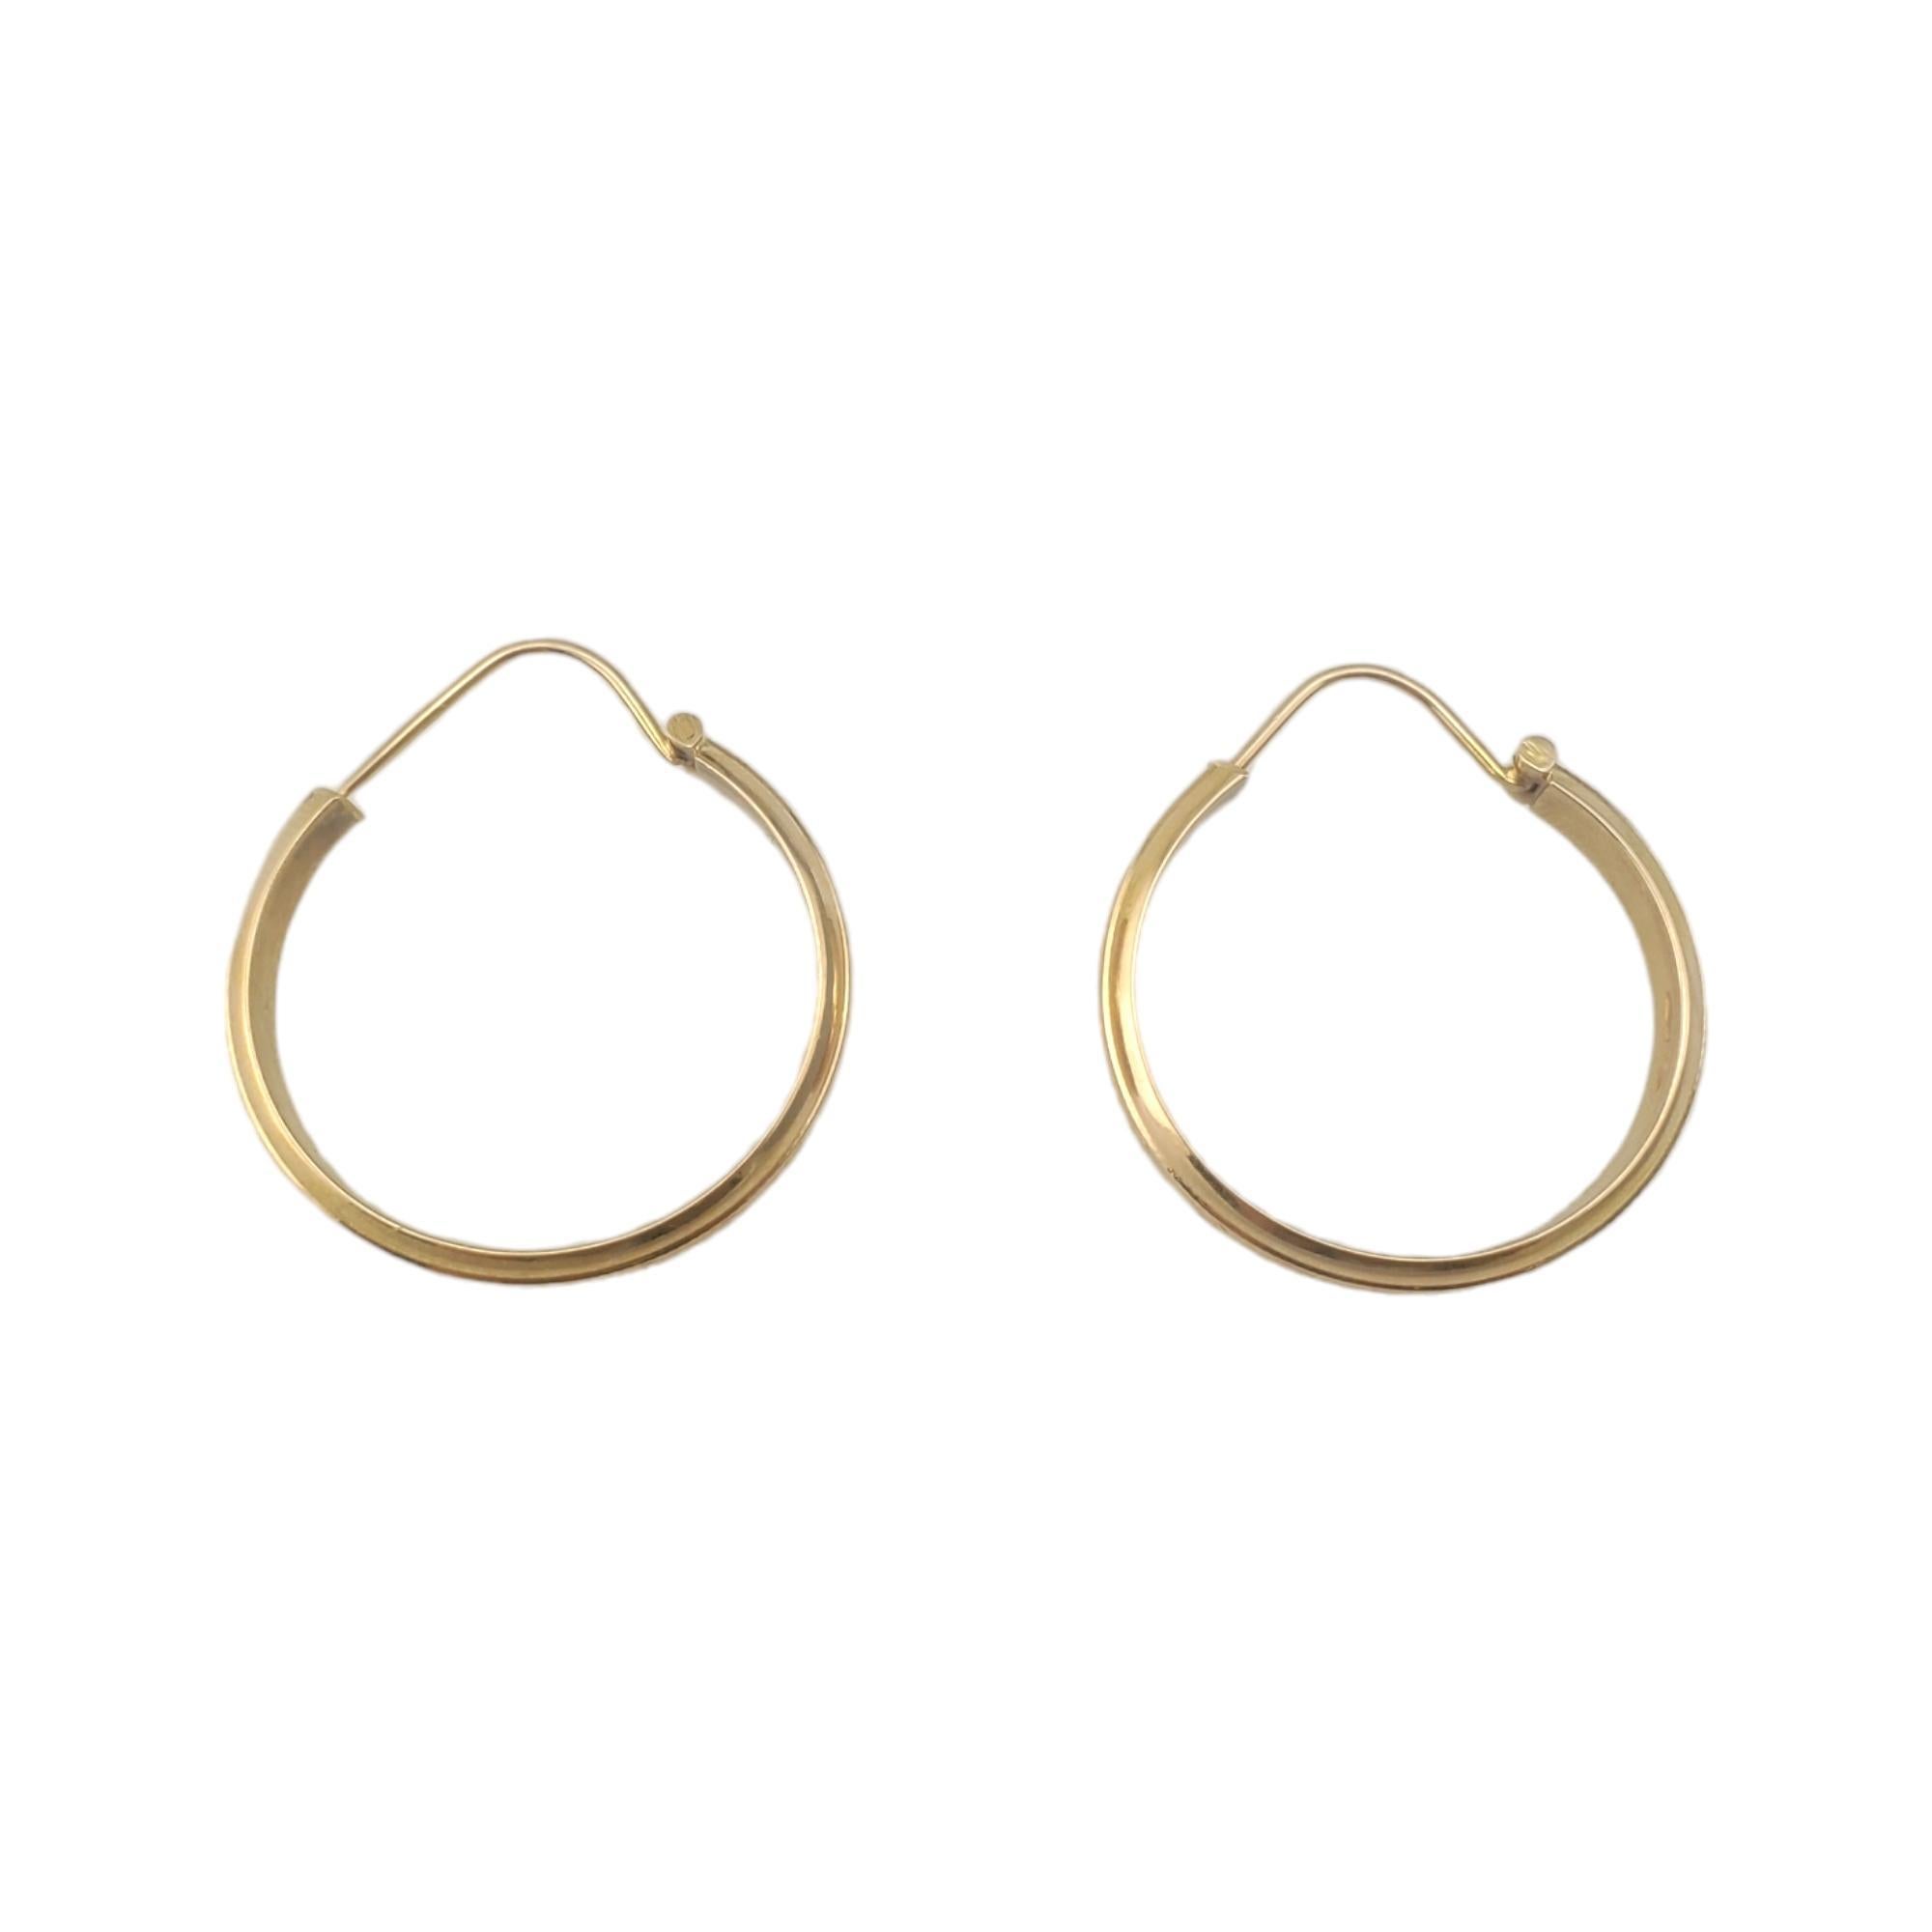 18K Yellow Gold Hoop Earrings with Scrolling Vine Design #17304 In Good Condition For Sale In Washington Depot, CT